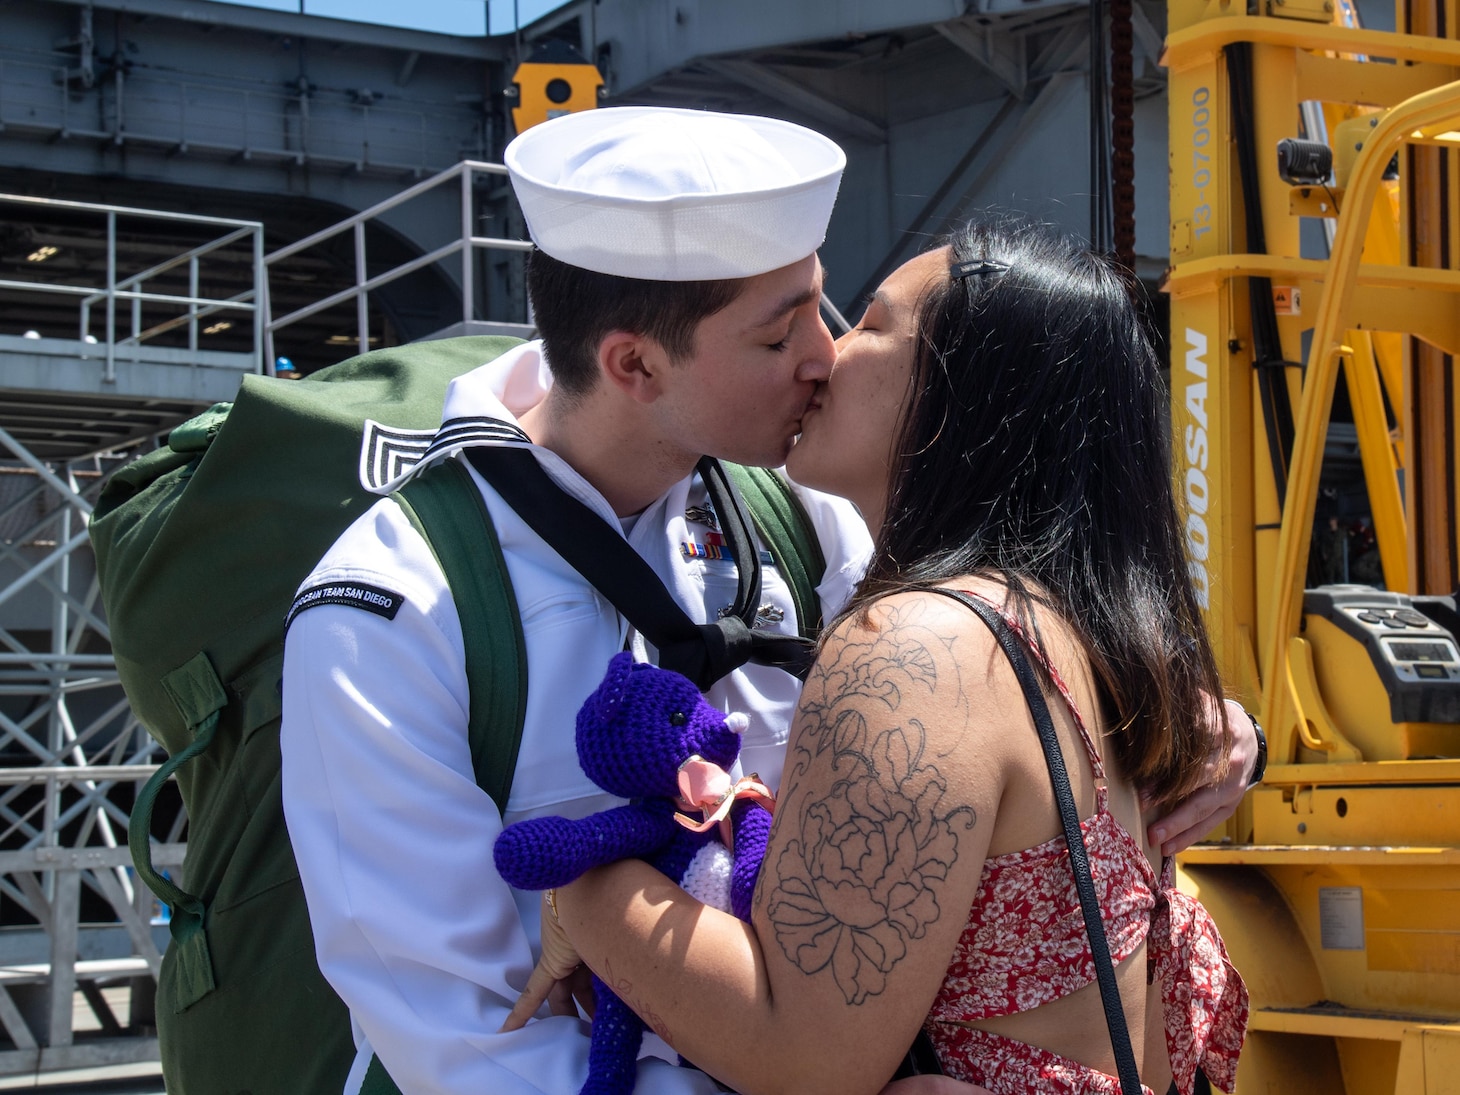 Aerographer’s Mate 2nd Class Daniel Campos, from Manassas, Va., greets his family on the pier.